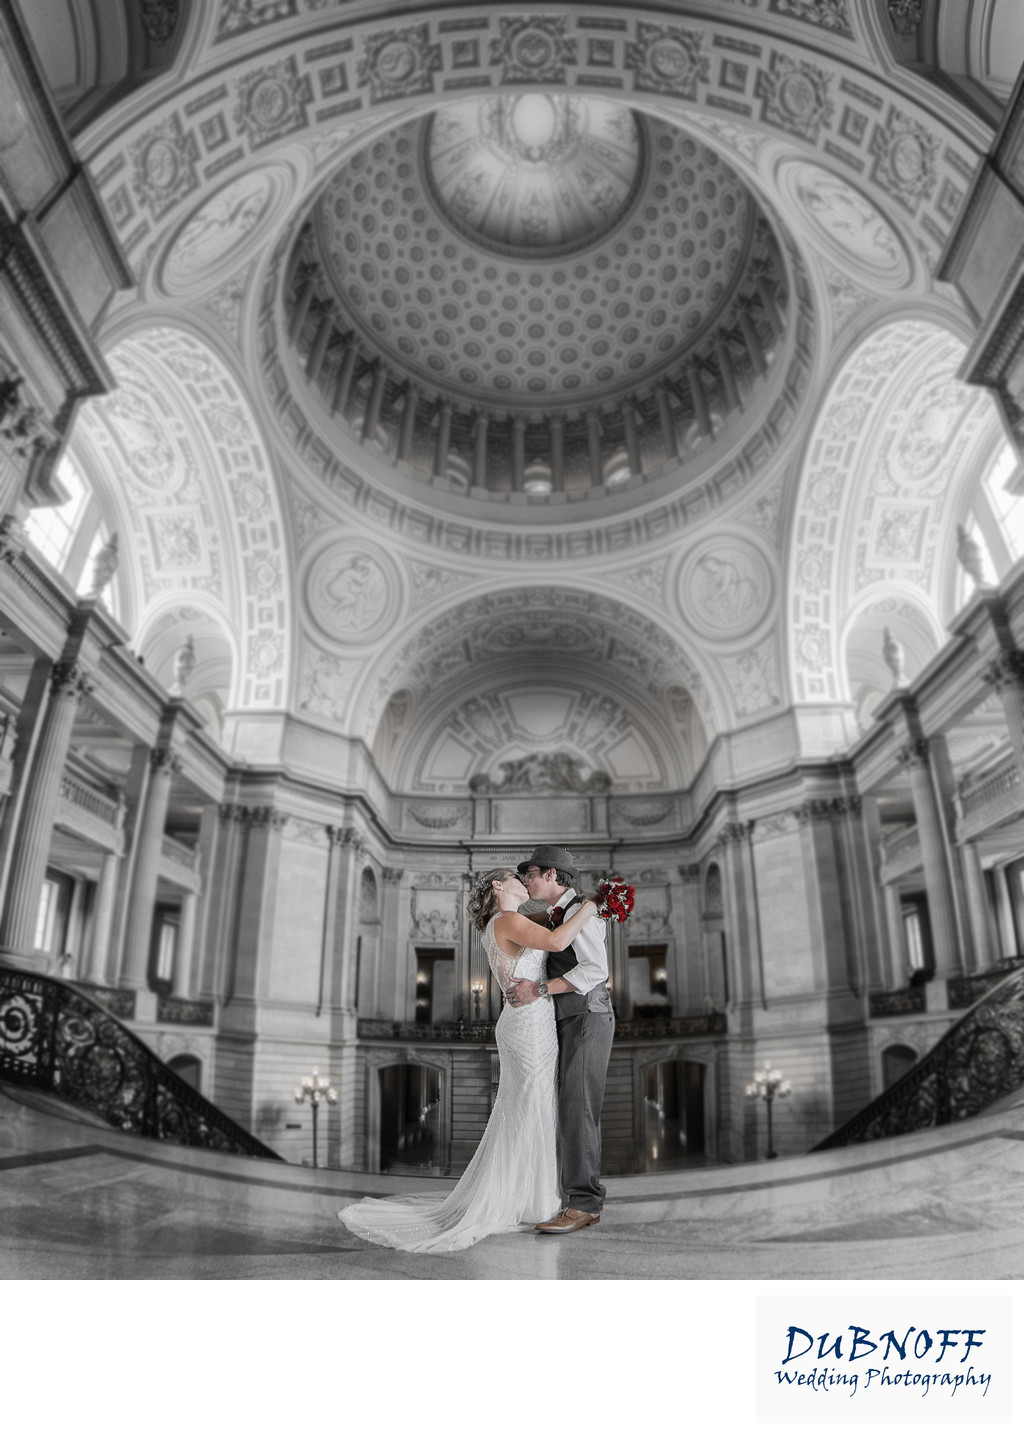 San Francisco Marriage in Black and White - Photo Taken in the Rotunda